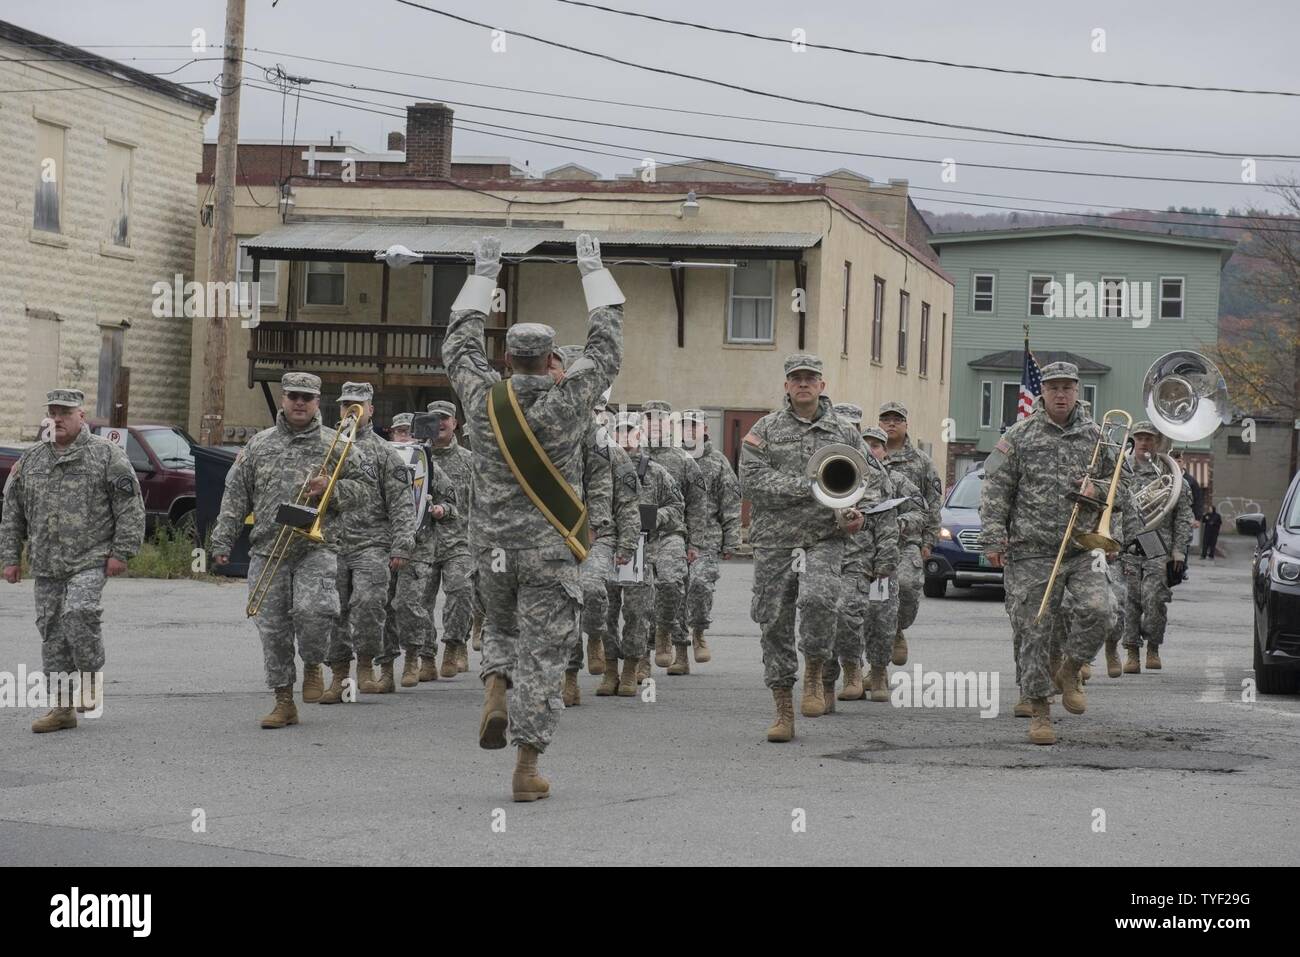 U.S. Soldiers with the 40th Army Band, Garrison Support Command, Vermont National Guard, march in the 2016 Scouting Salute to Veterans Parade in Hartford, Vt., November 5, 2016. The parade honors veterans for their service to their country. Stock Photo